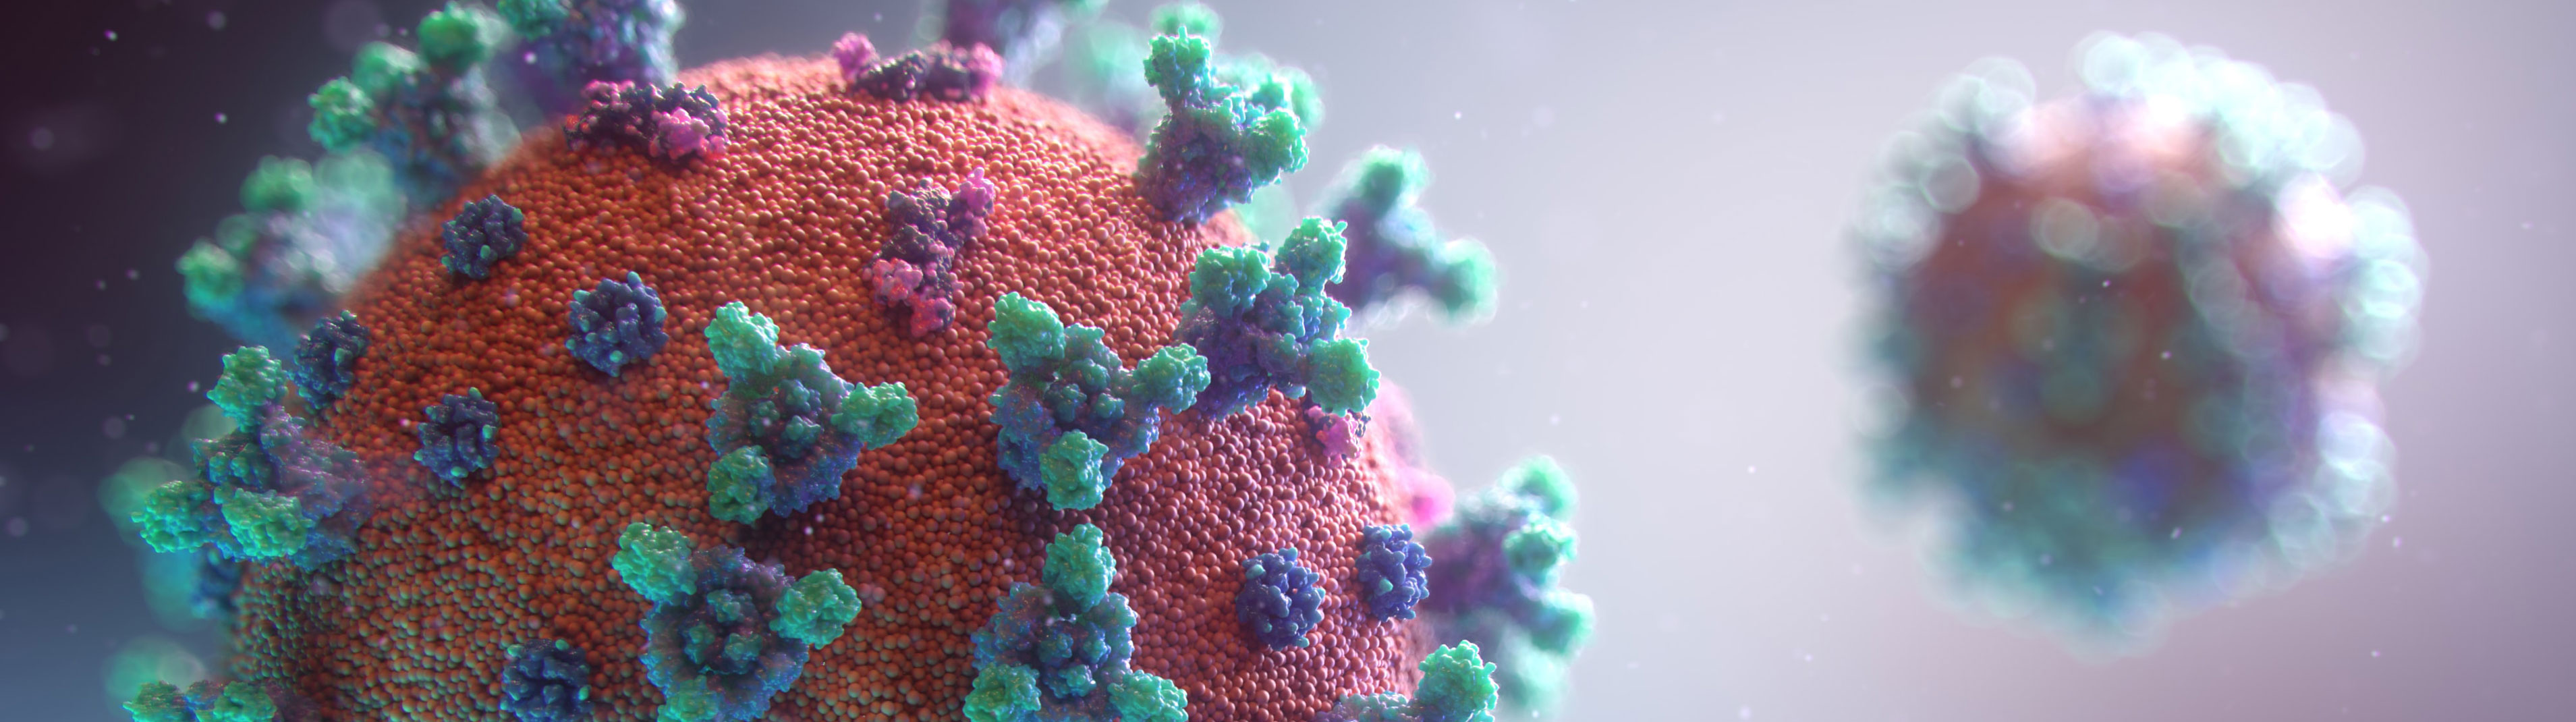 Close up image of a COVID-19 virus cell.